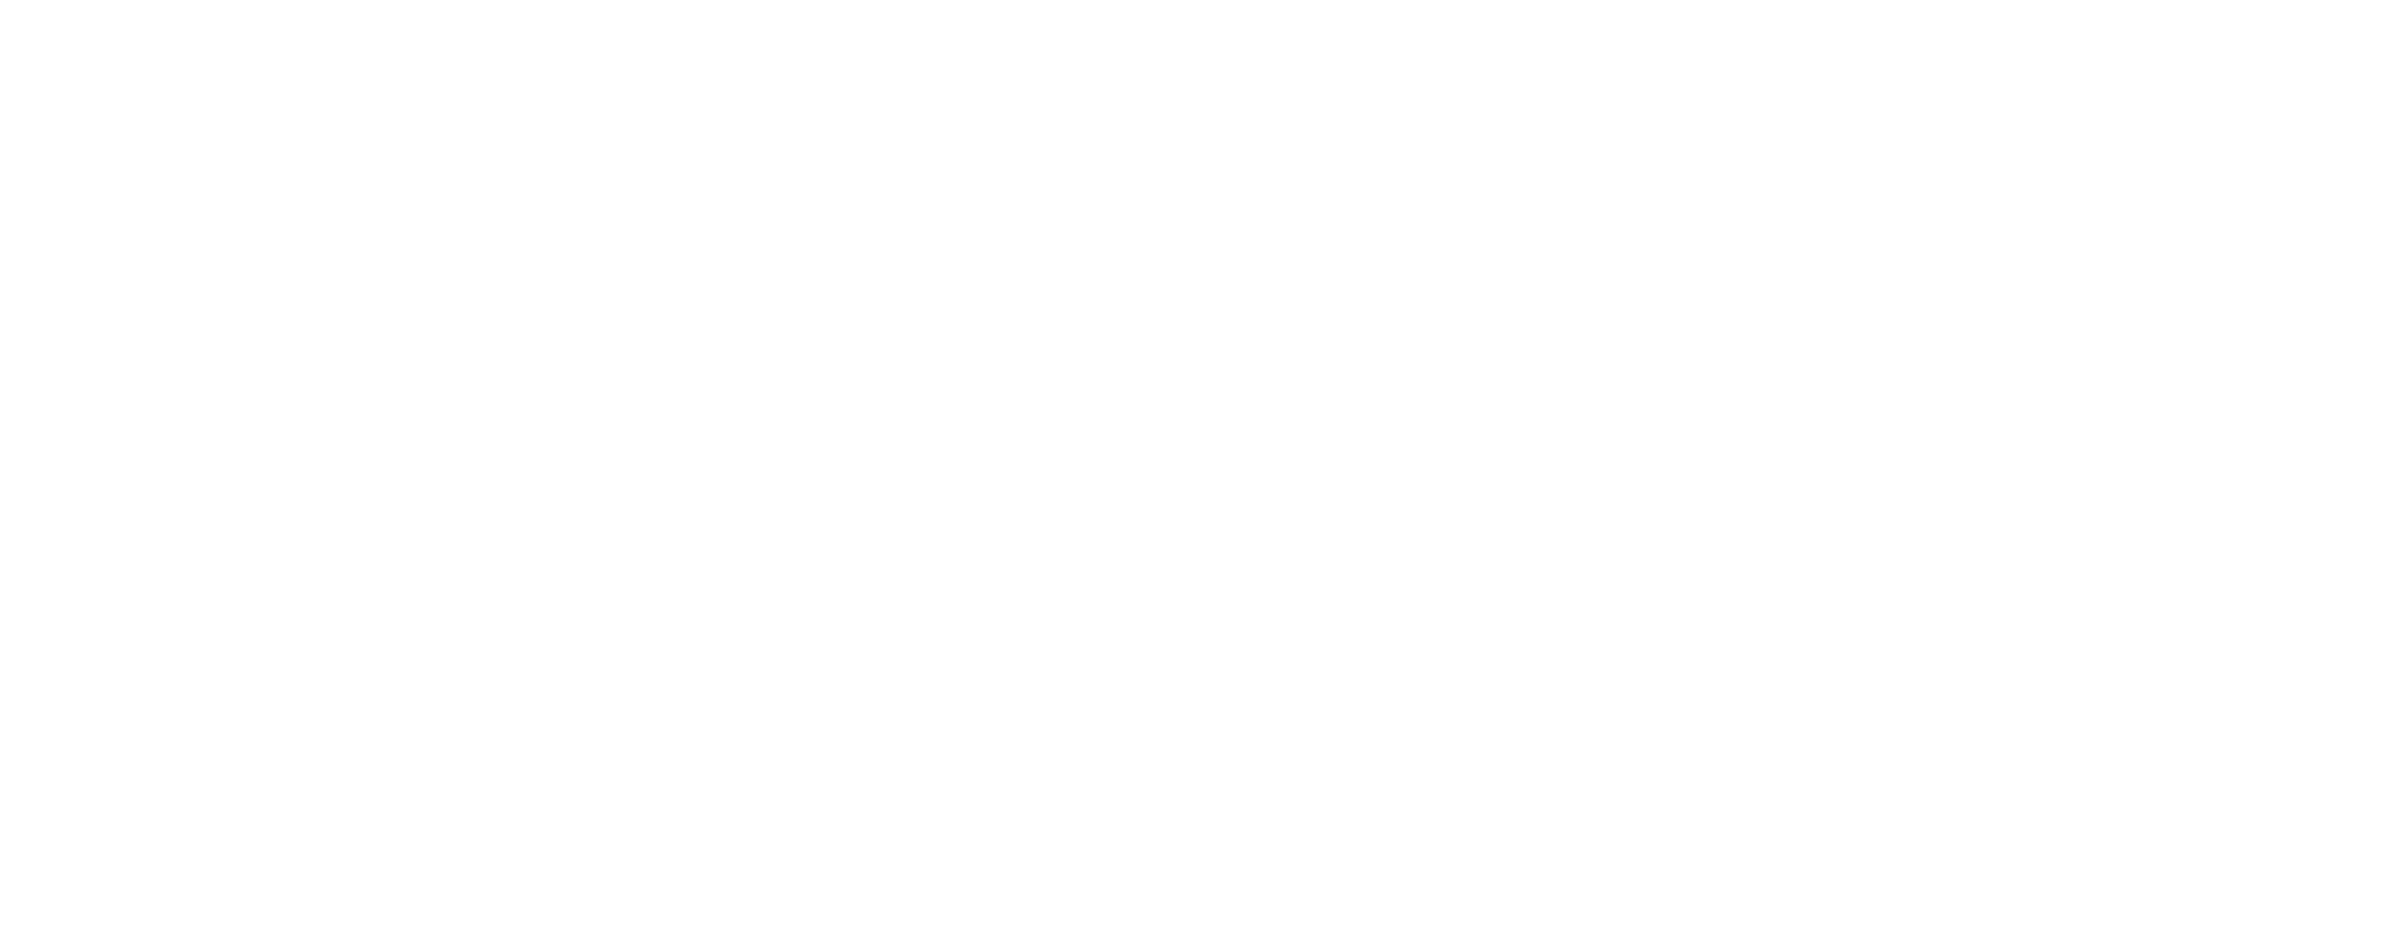 2023.10.15 Attack Score.png